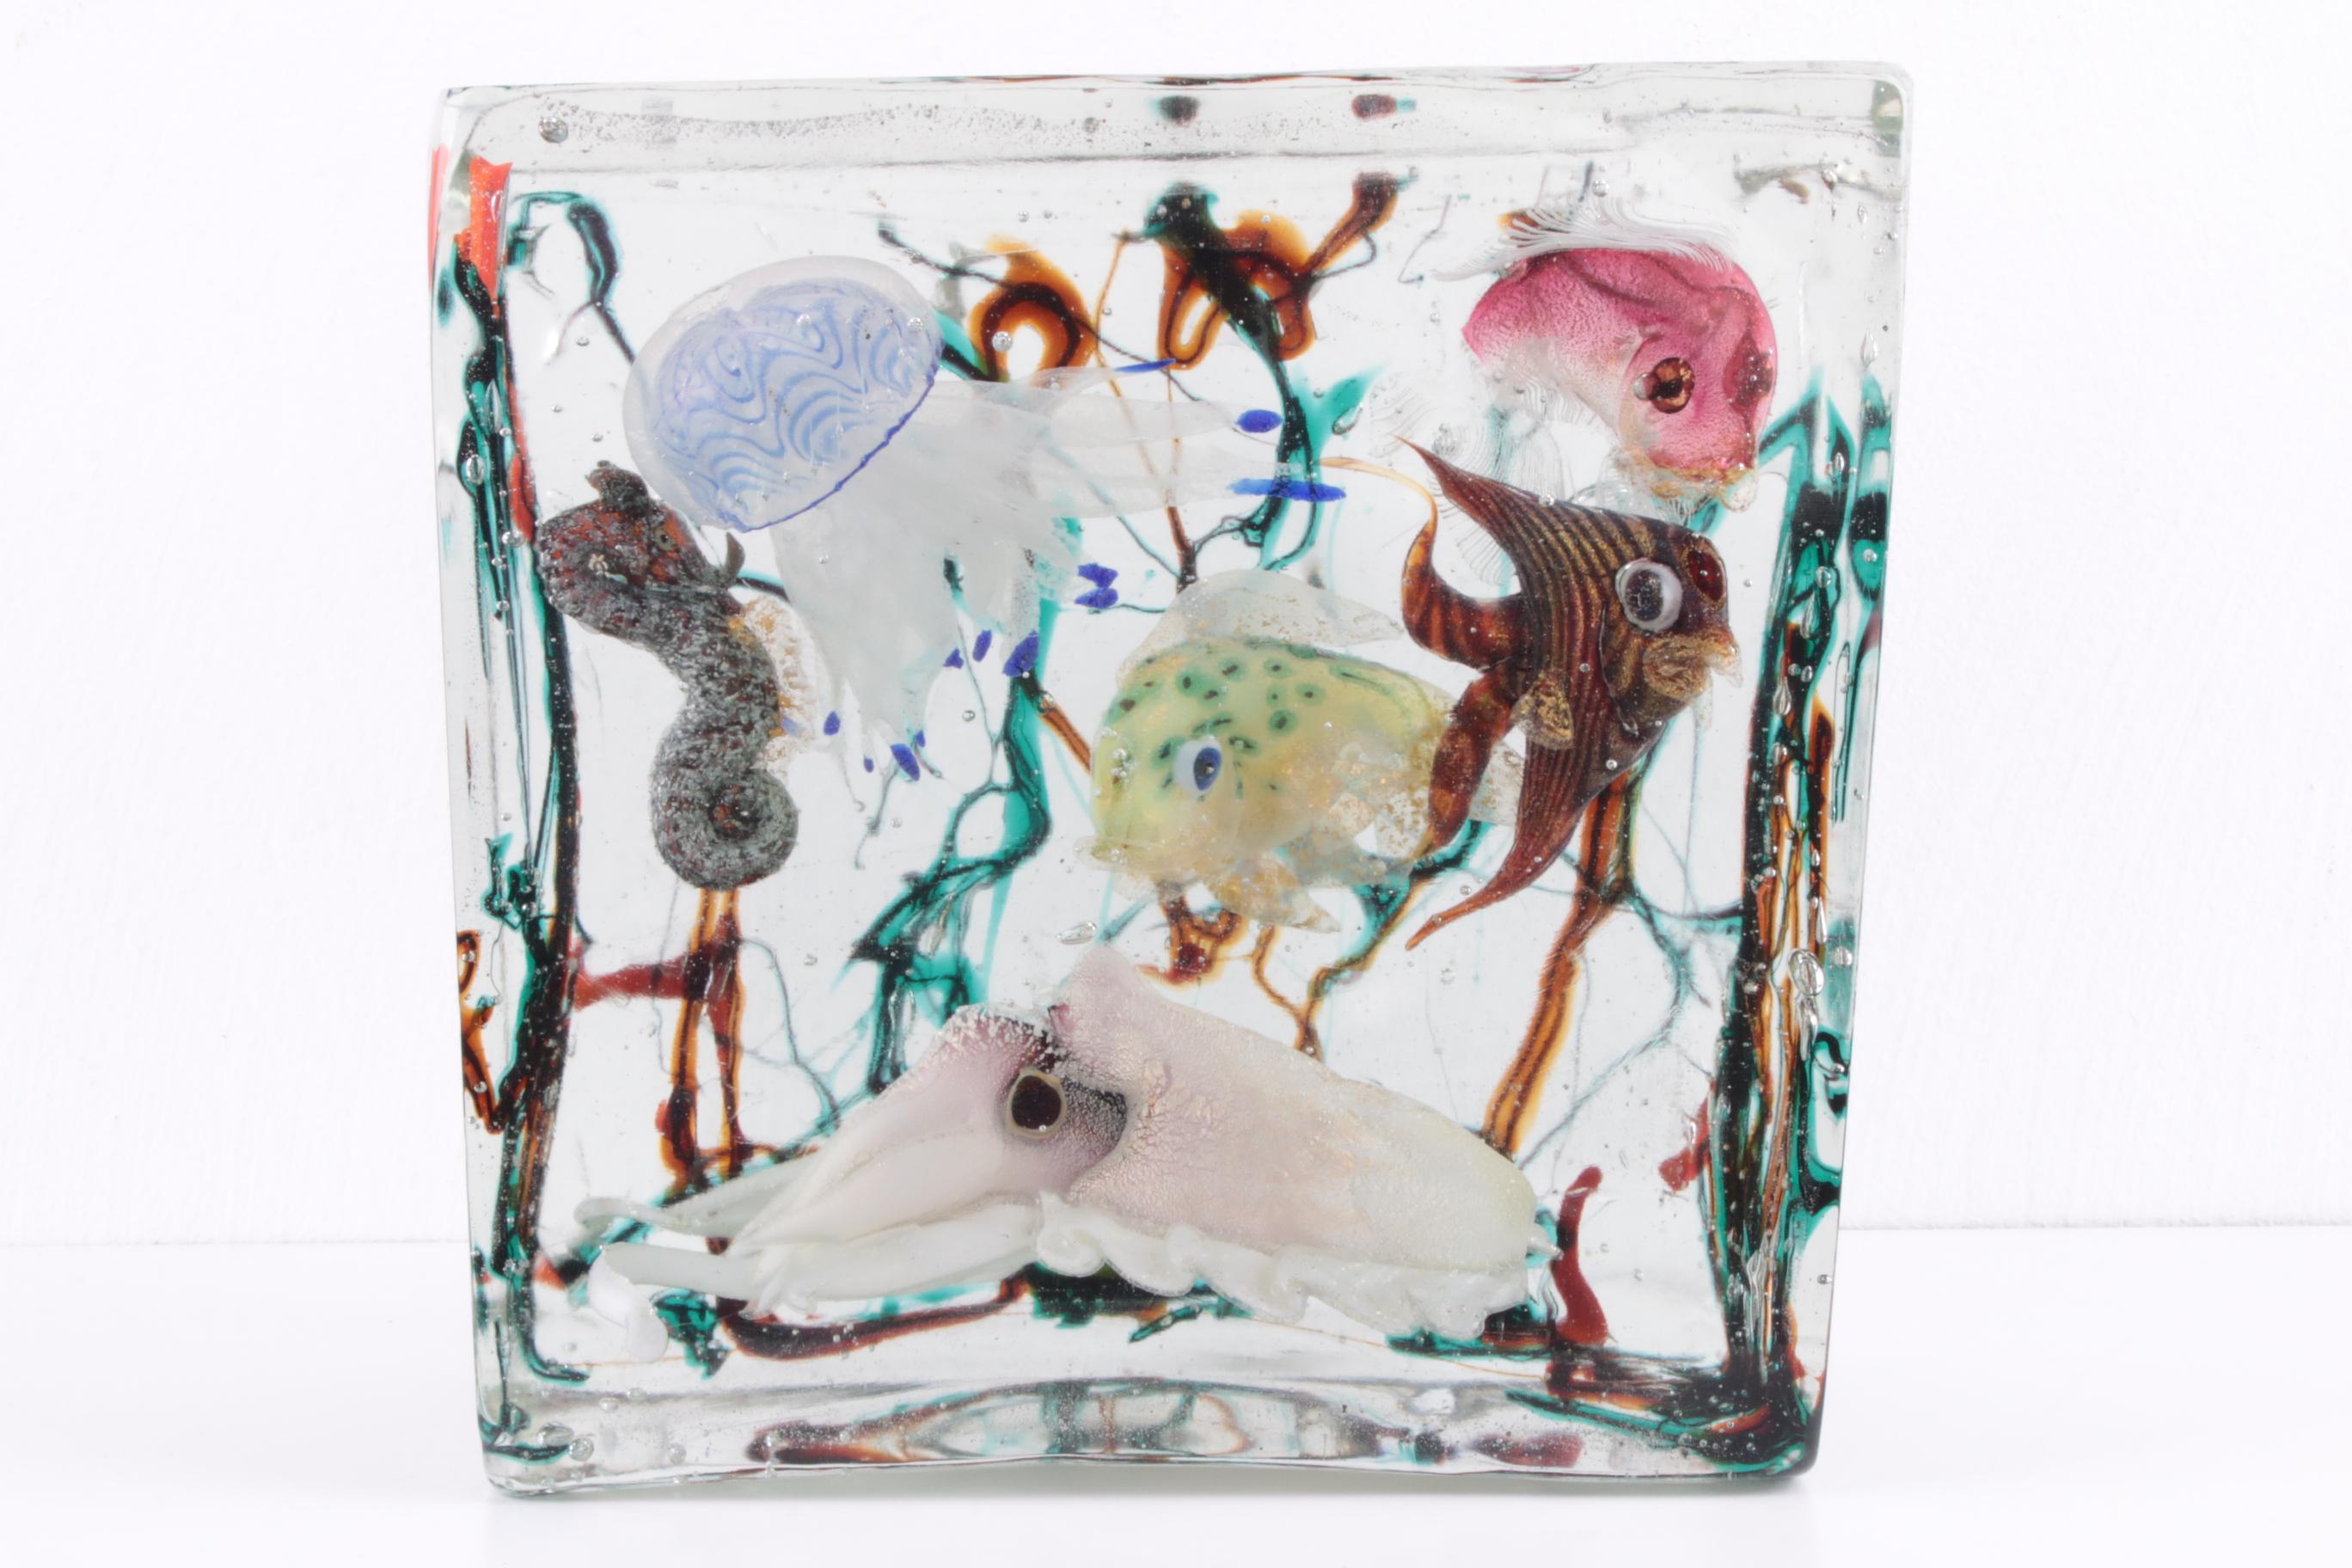 Murano Glass Aquarium by Alfredo Barbini for Cenedese, 1960s

Rare Piece by Alfredo Barbini Murano
art glass aquarium with
three fish,
squid, sea cat
jellyfish
and seahorses in an aquatic scene.

This is a very rare piece of glass art made in the